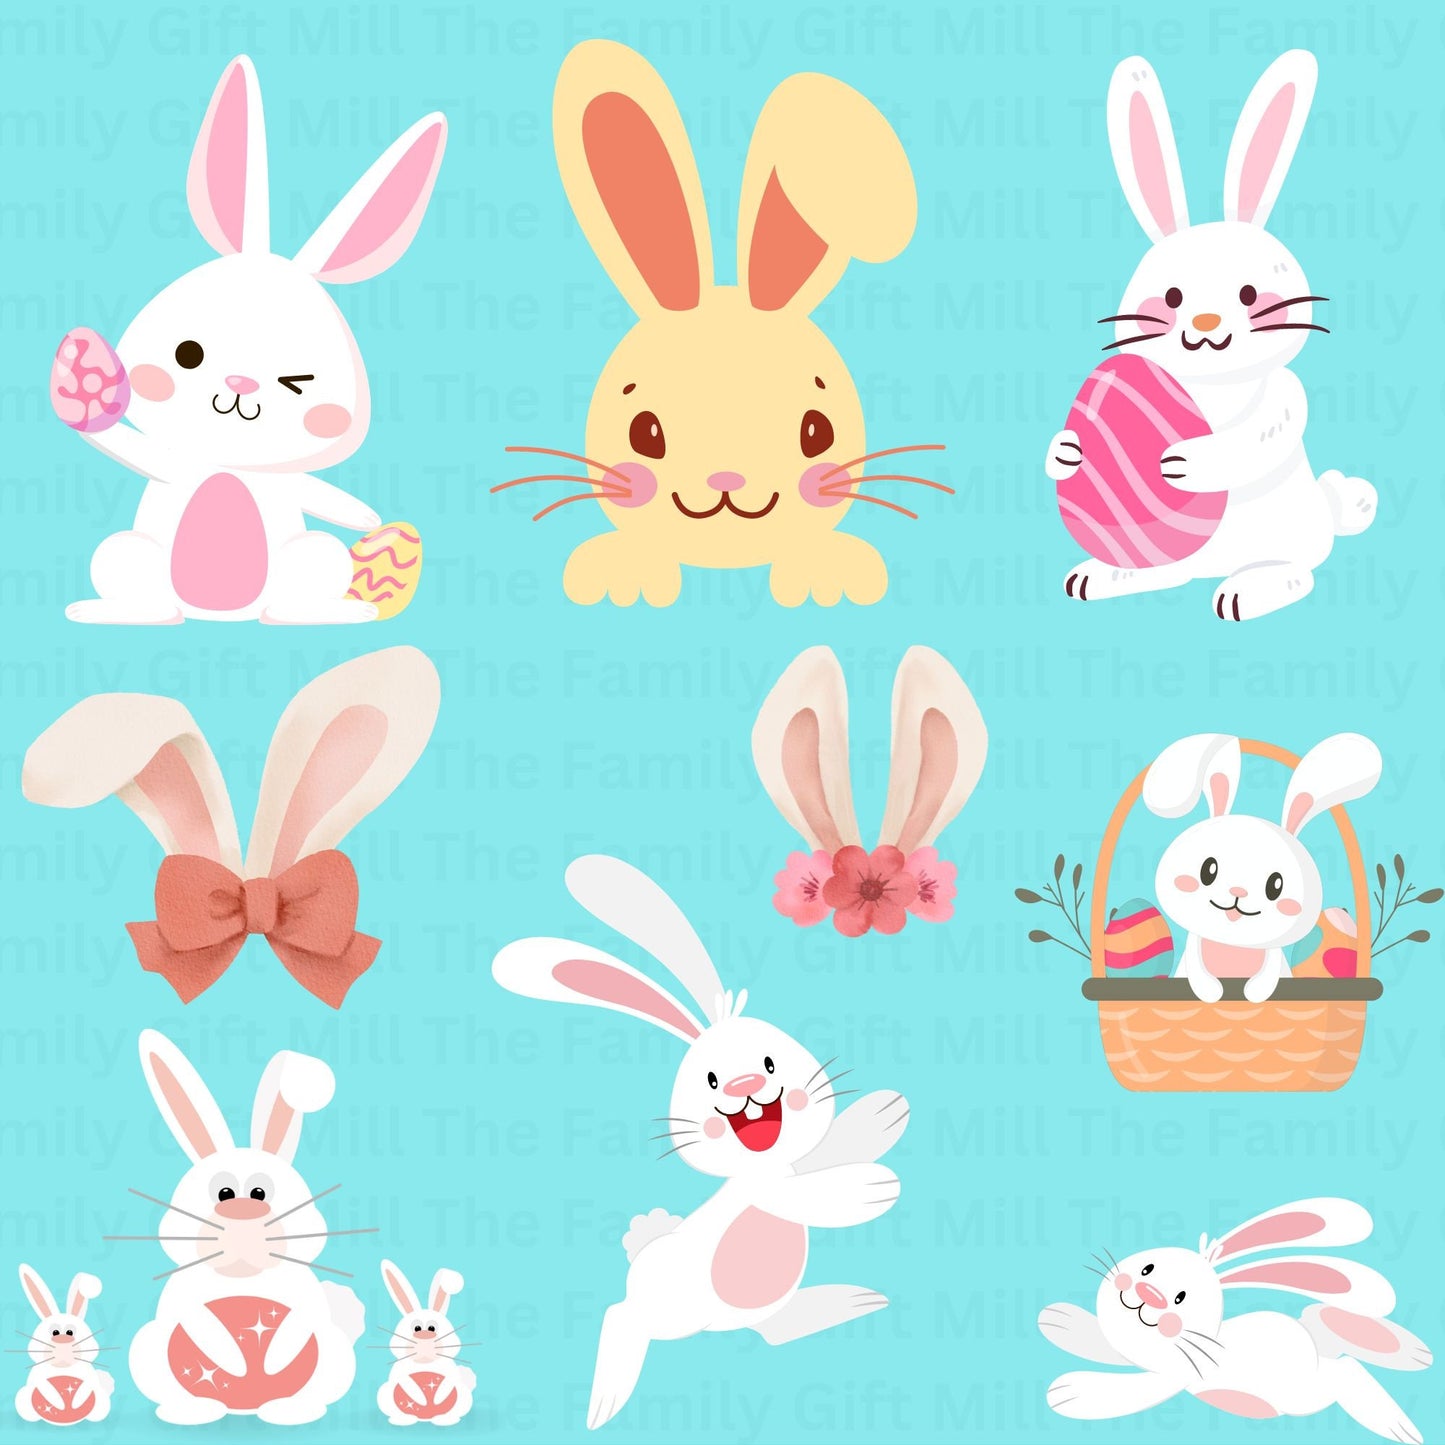 Easter Bunny Fun! Get our Happy Easter SVG Bunny Cut Files for Cricut. Adorable Bunny Faces, Monograms, Bandanas & Eggs. Perfect for Kids!